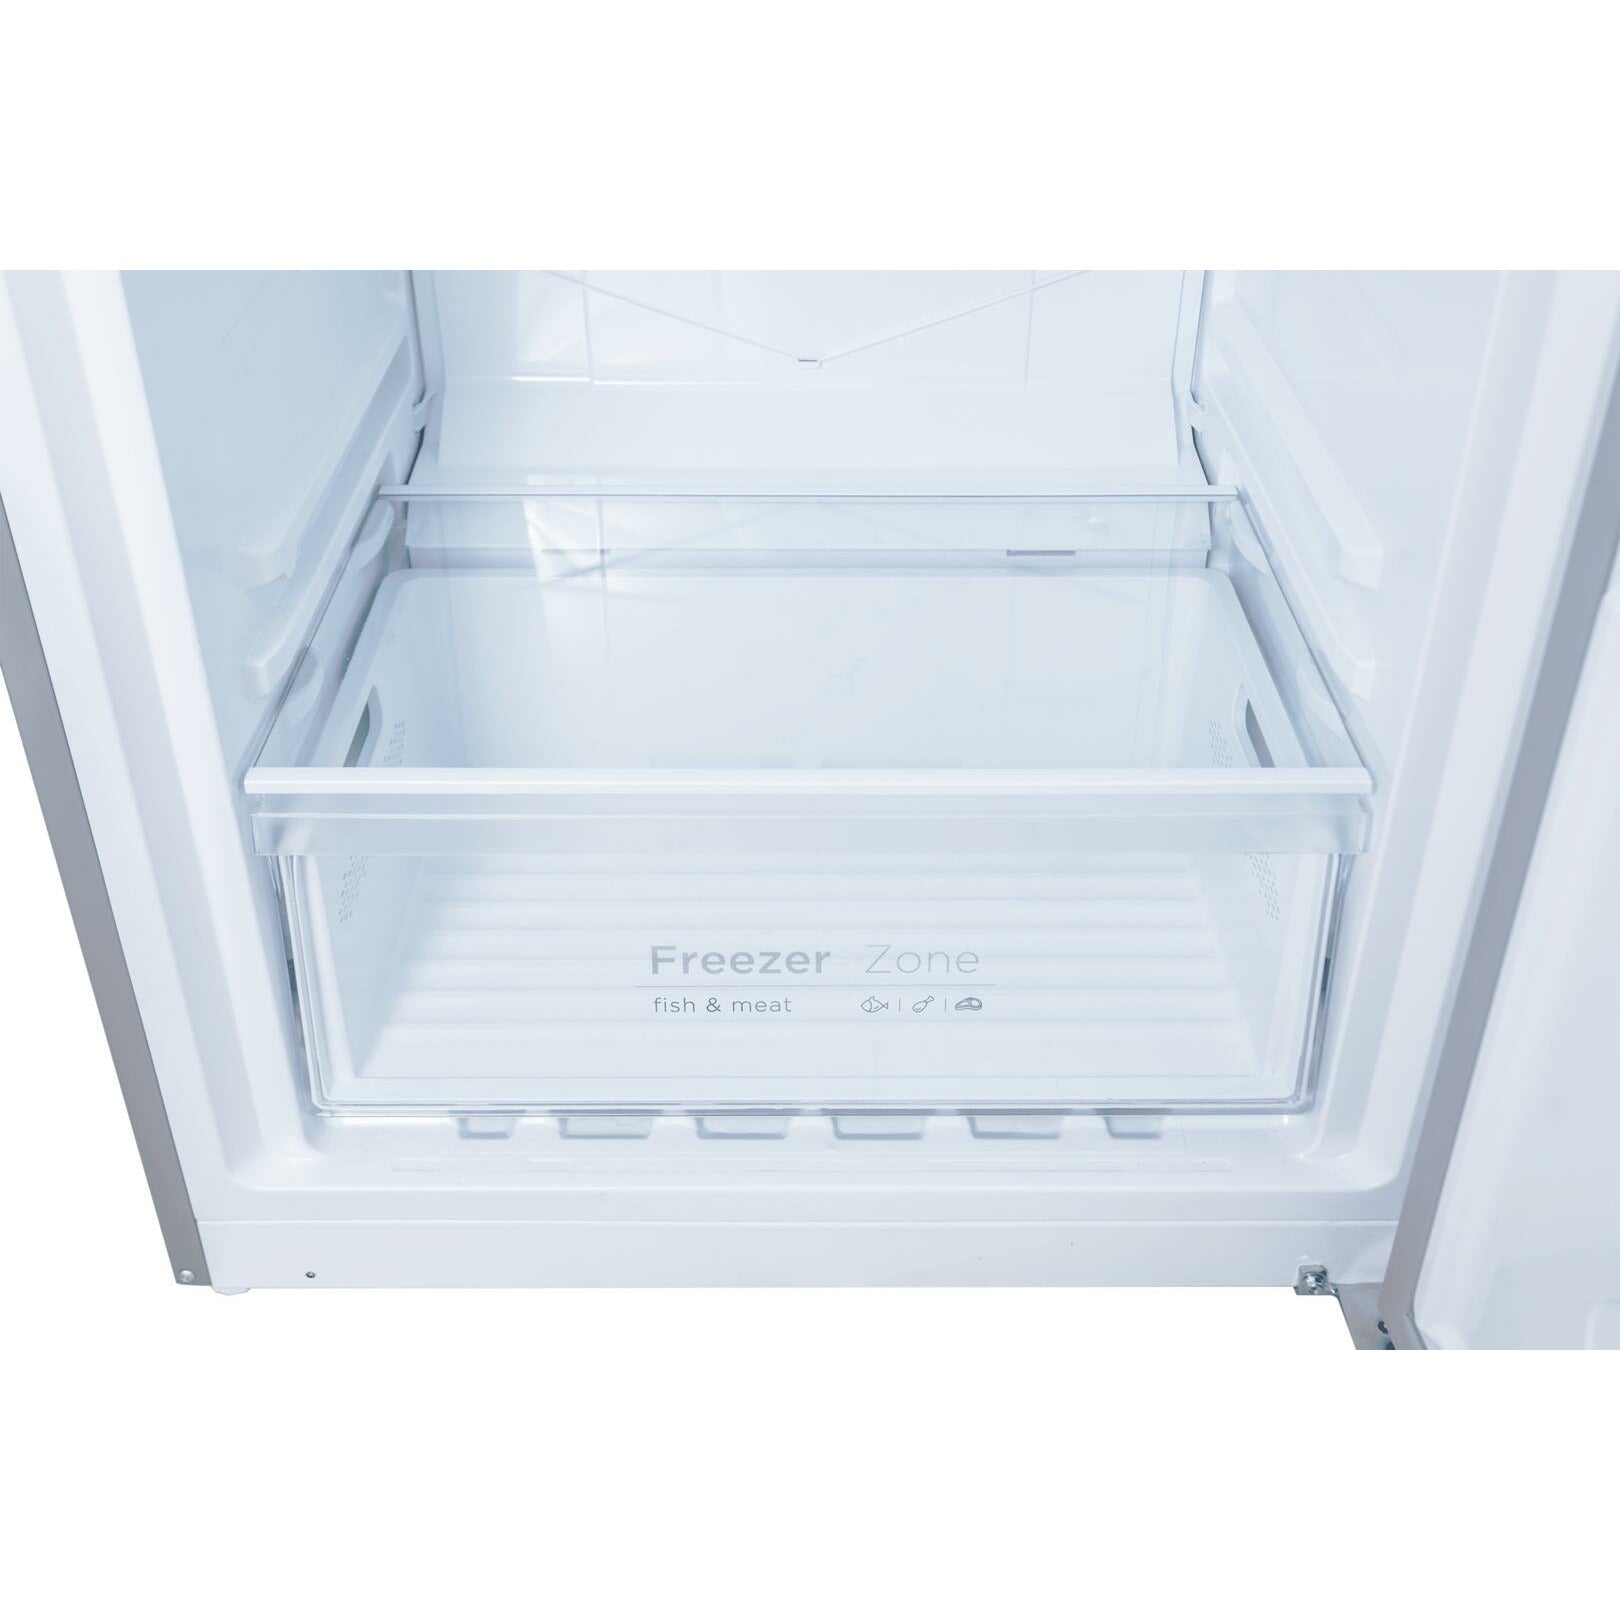 Forte 450 Series 28 Inch Counter Depth All Refrigerator, in Stainless Steel - F14ARESSS